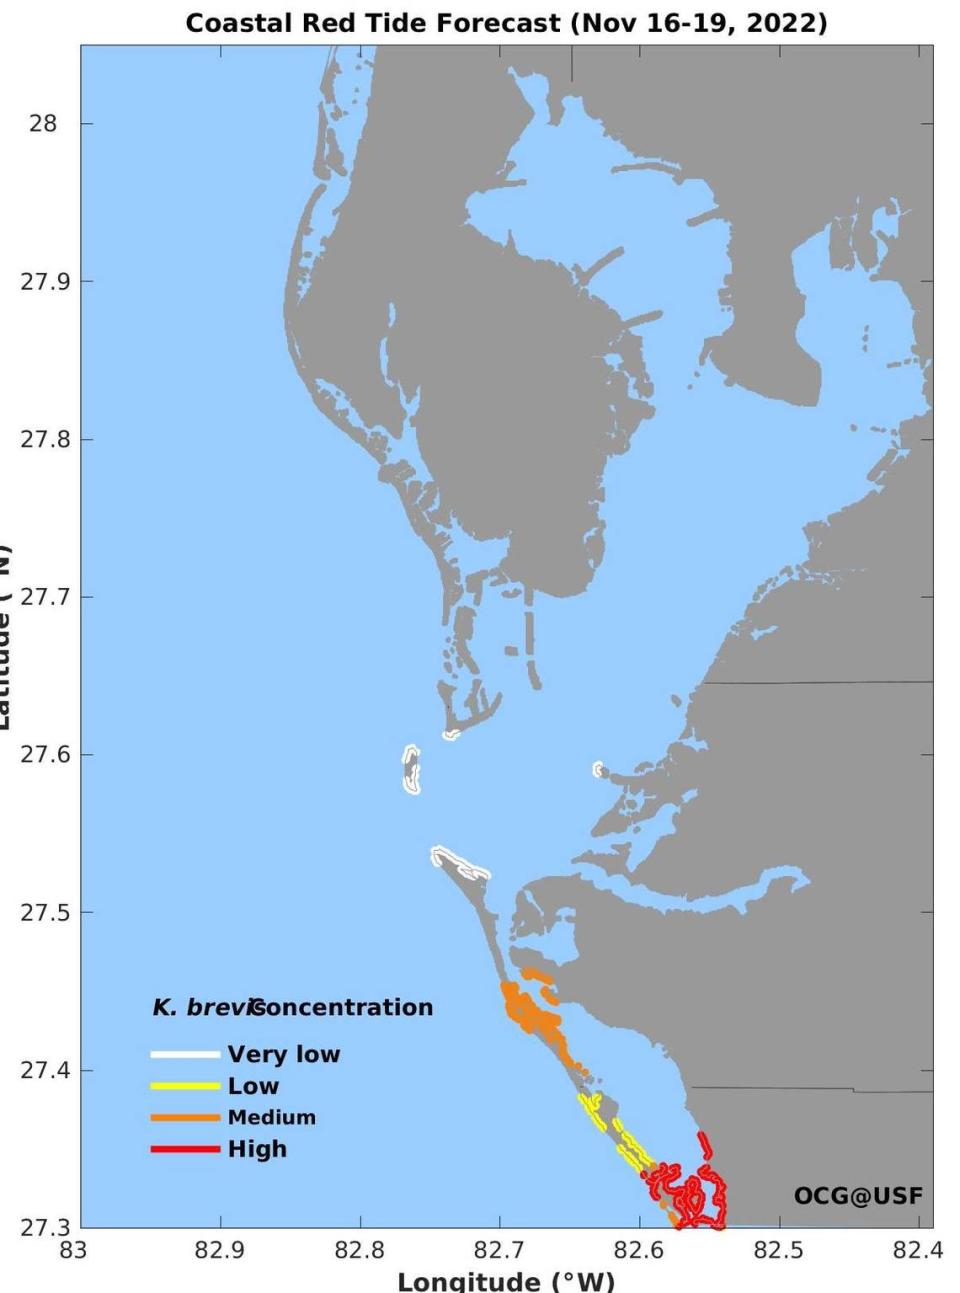 A map from University of South Florida’s Ocean Circulation Lab shows the red tide forecast in the Tampa Bay region over the coming days.